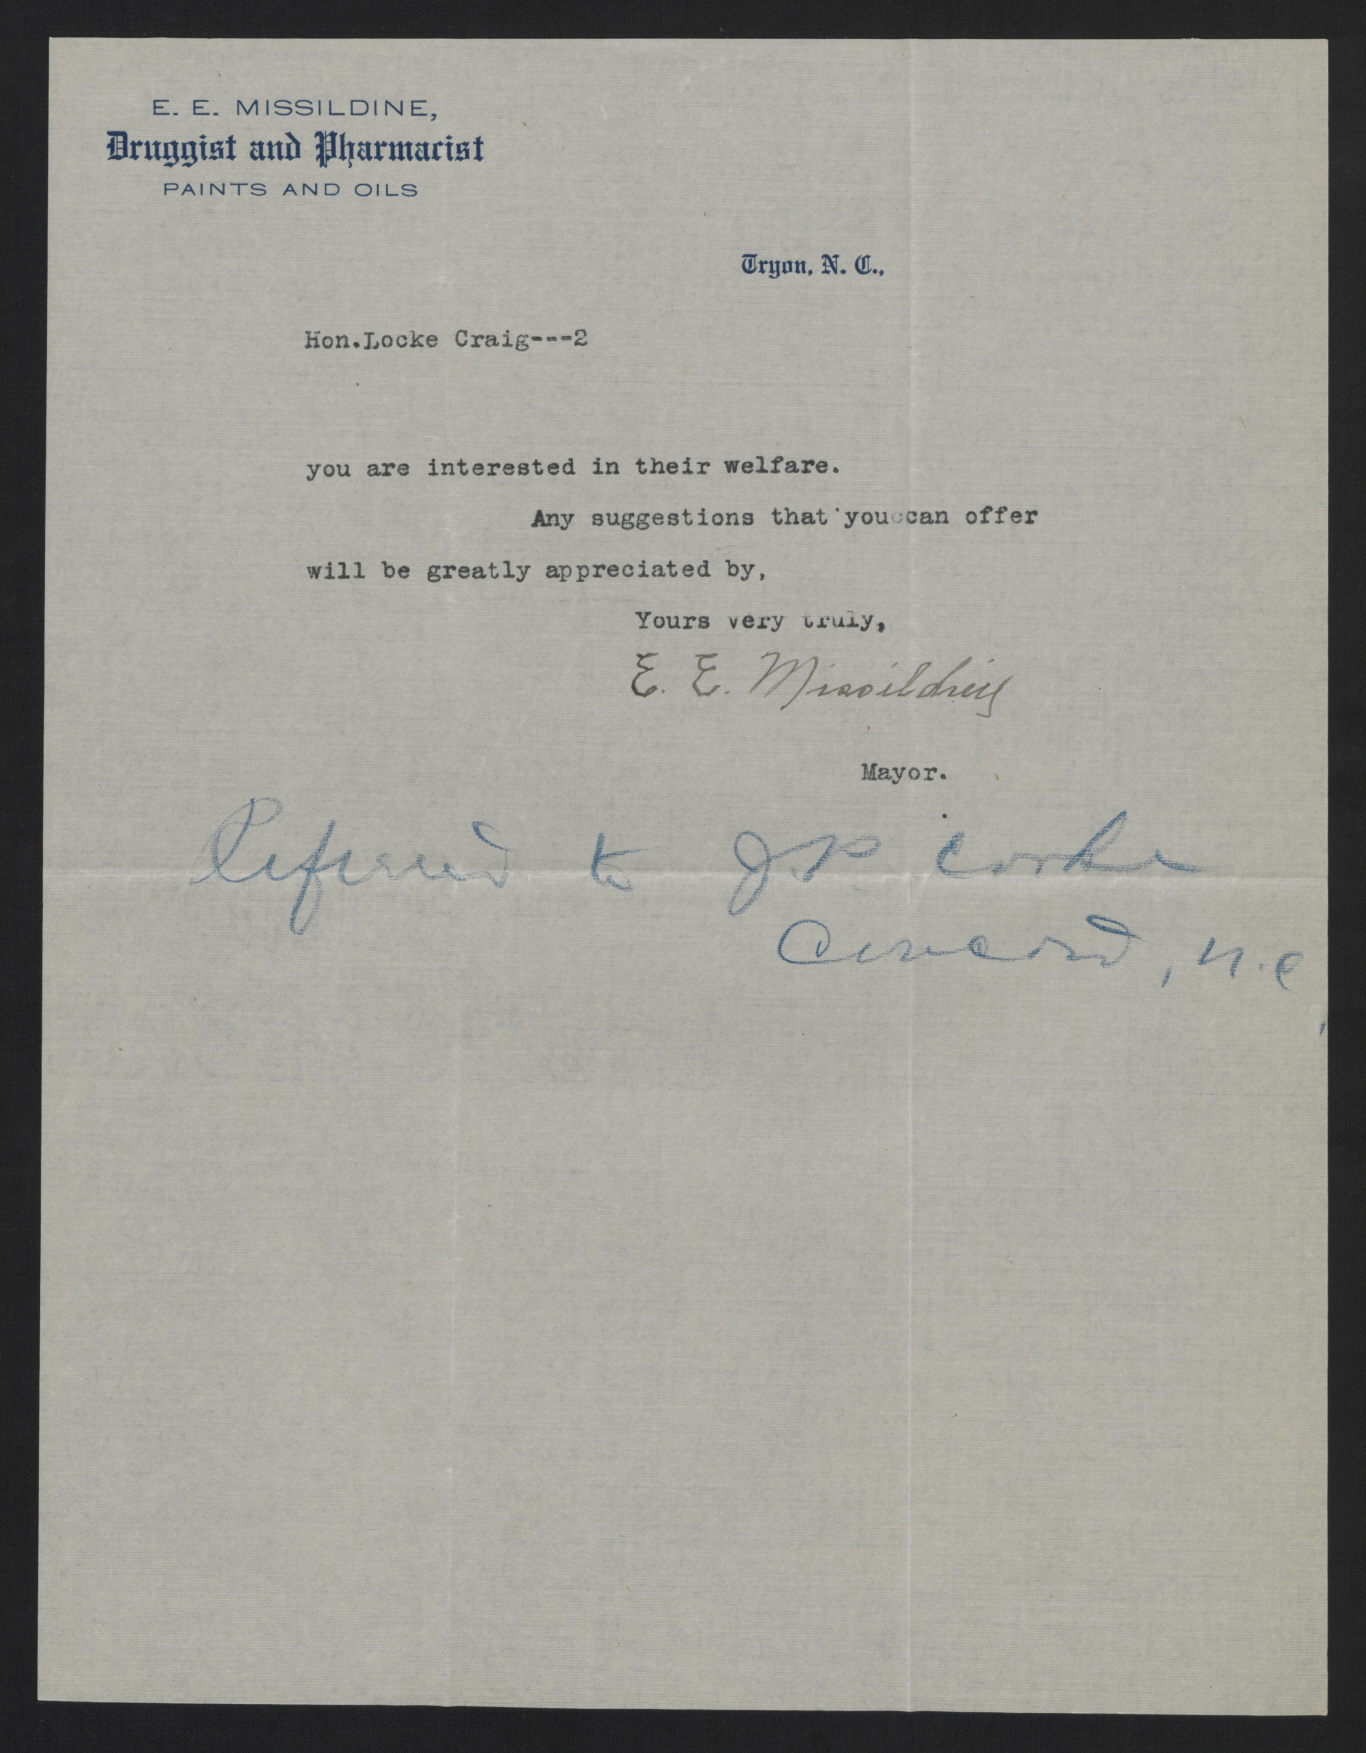 Letter from Missildine to Craig, May 1913, page 2